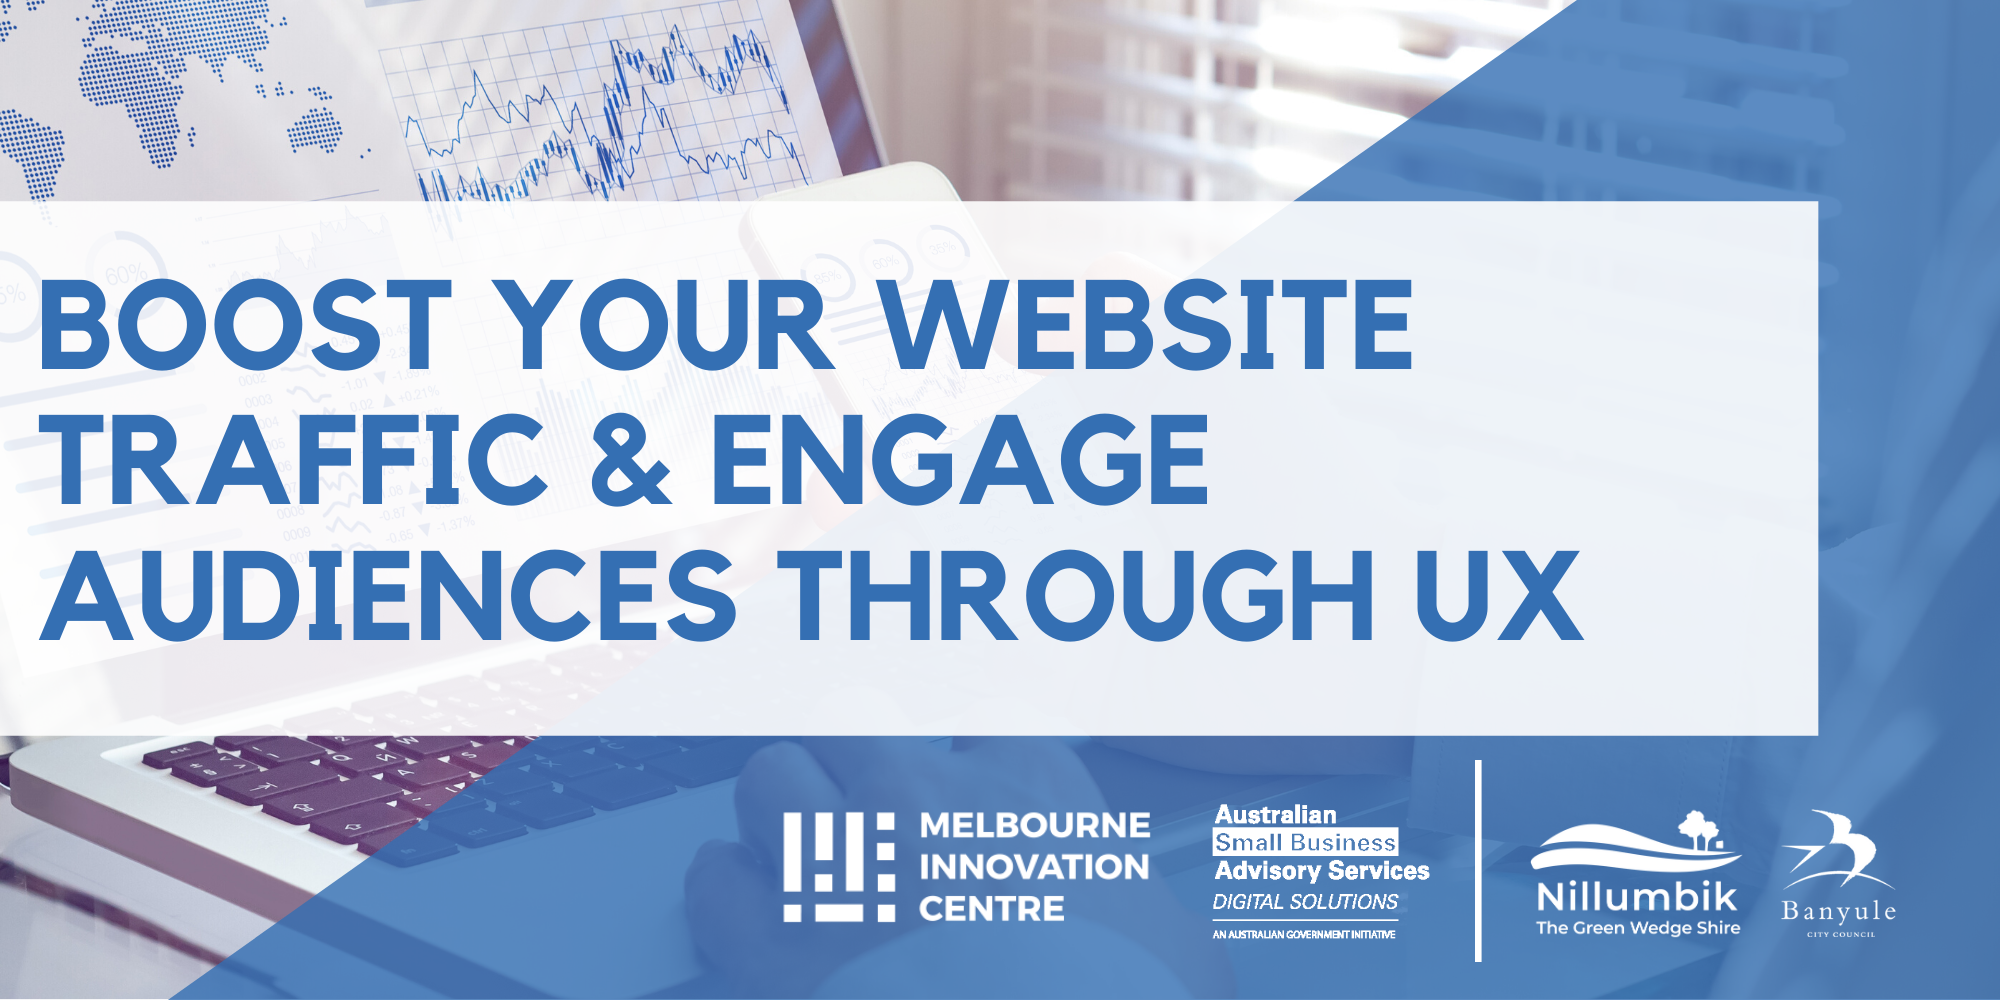 Boost your Website Traffic and Engage Audiences through UX - Nillumbik/Banyule